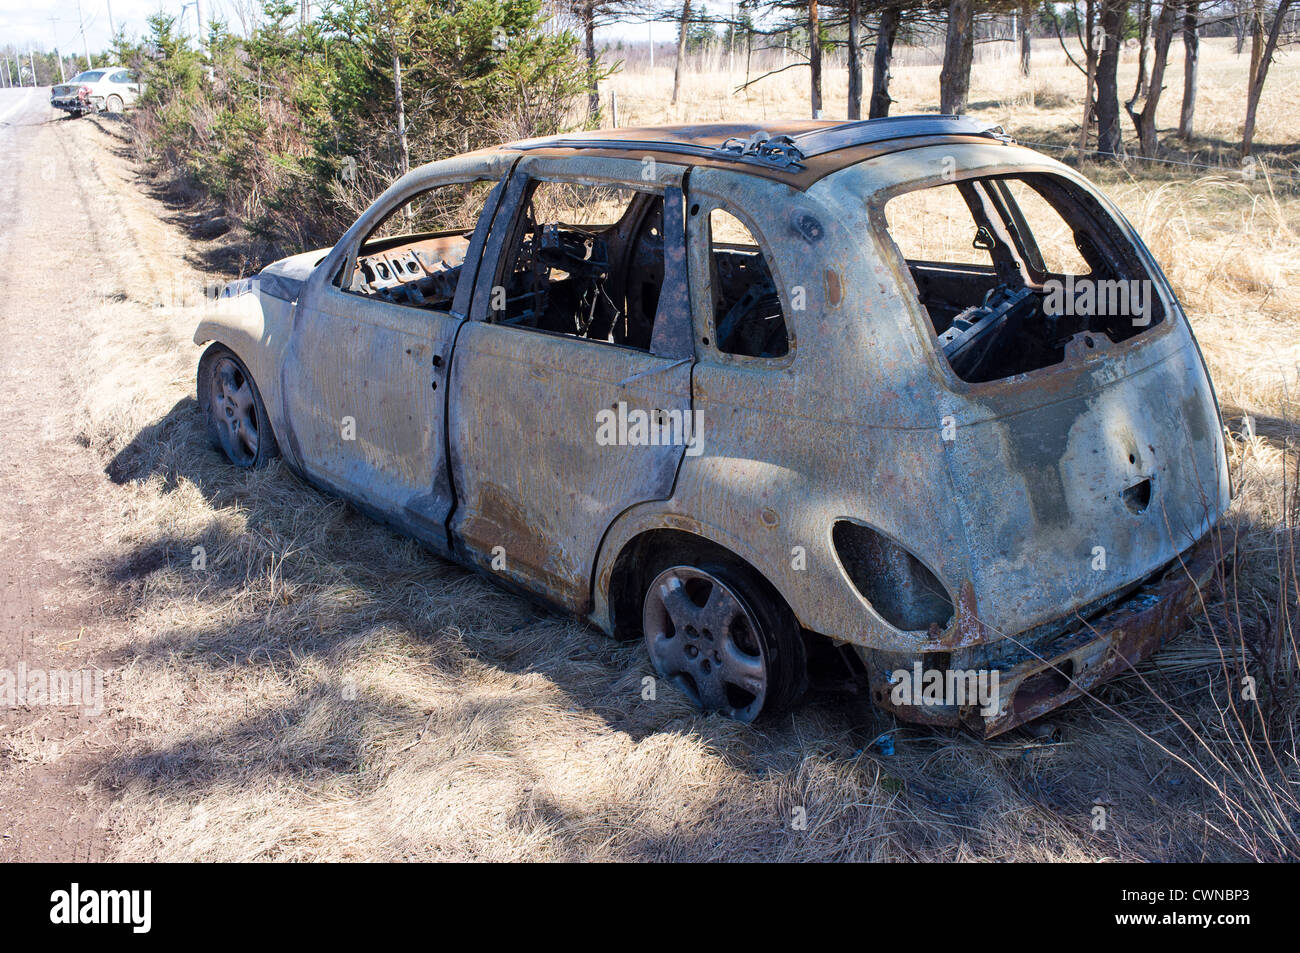 A burned out car sits on the side of a road after an accident. Stock Photo